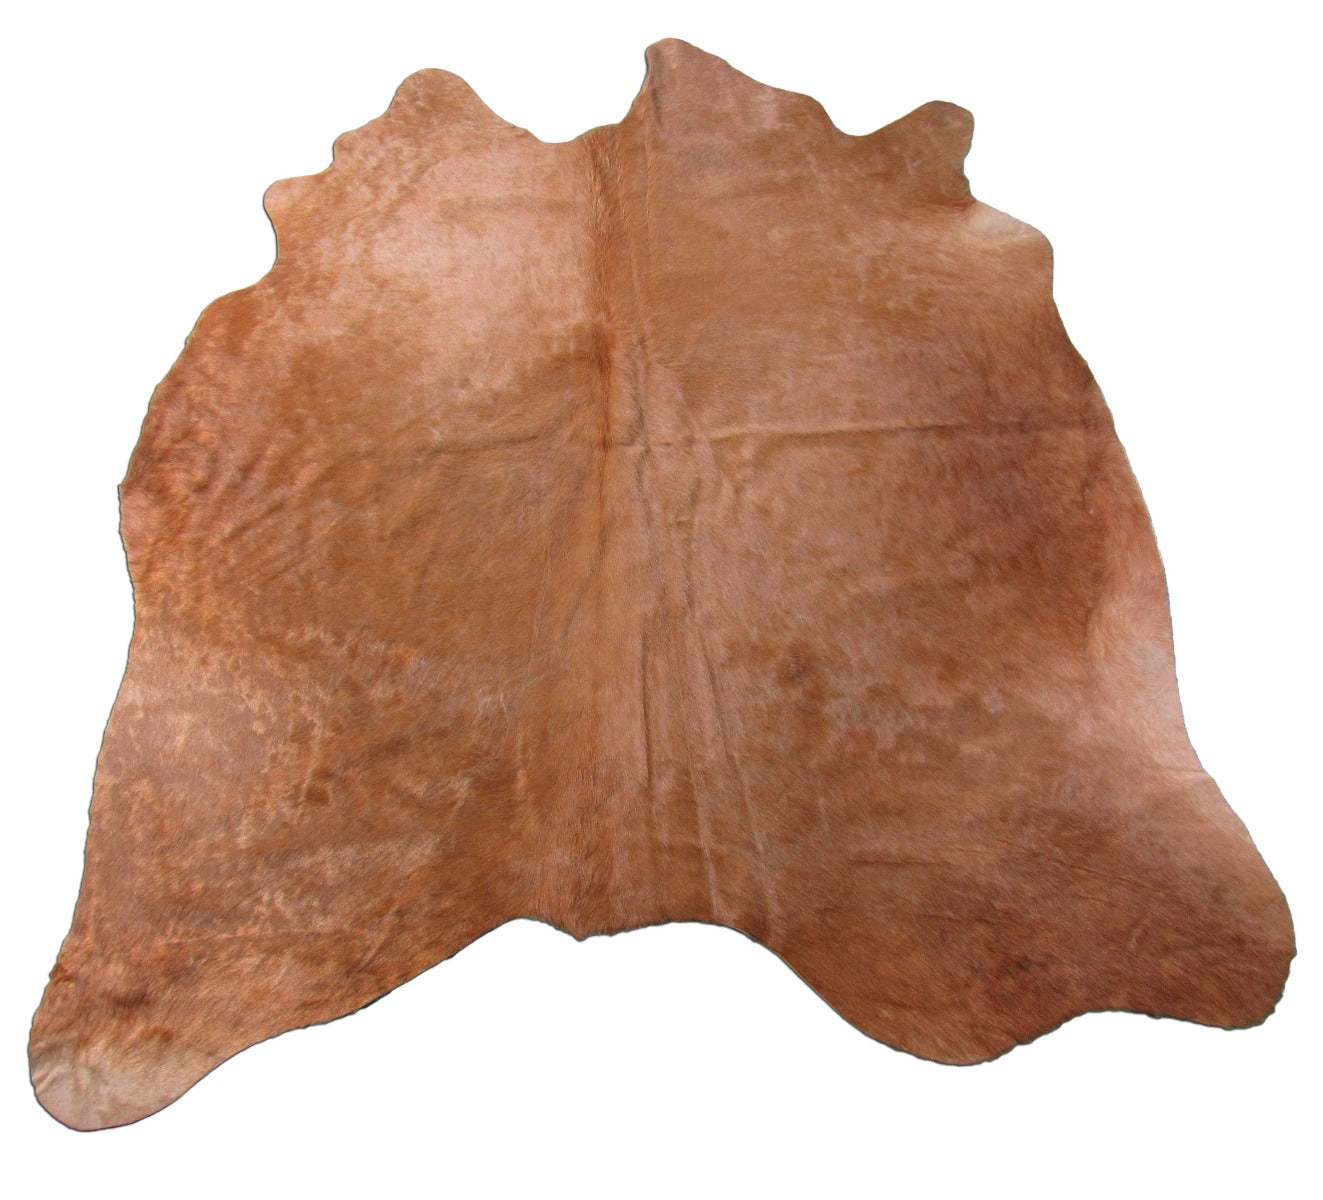 Solid Caramel Brown Cowhide Rug (veggie tanned) - Size: 6x5 1/4 feet M-1001